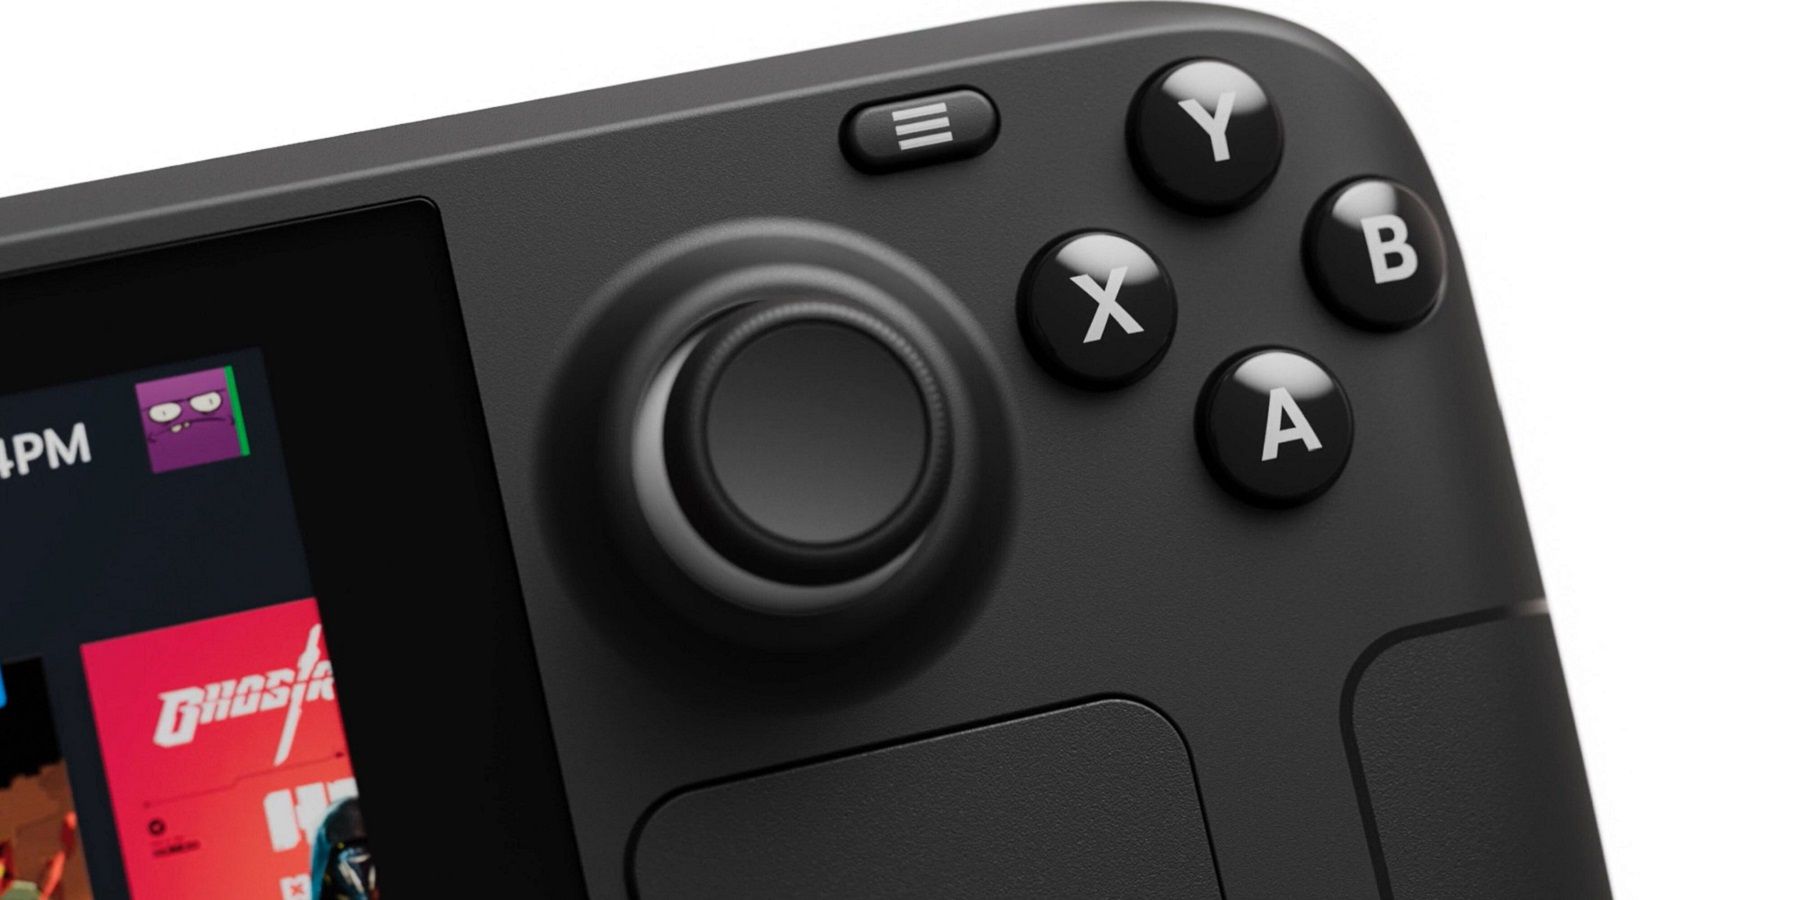 Close up photo of the Valve Steam Deck showing the right-hand buttons and right analog stick.